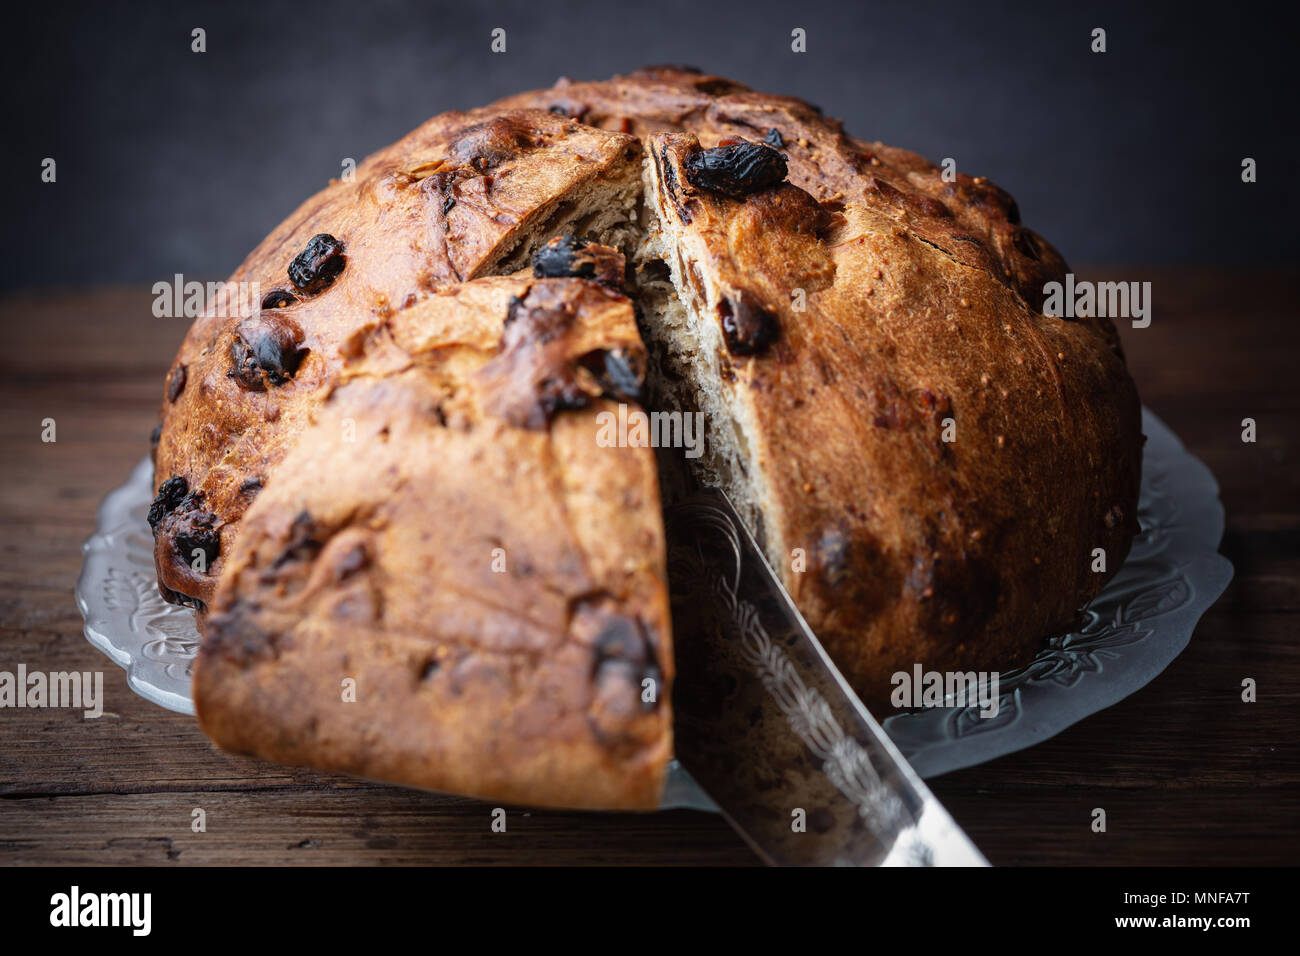 Bisciola, traditional nuts and figs bread for Christmas of Valtellina valley, Italy Stock Photo